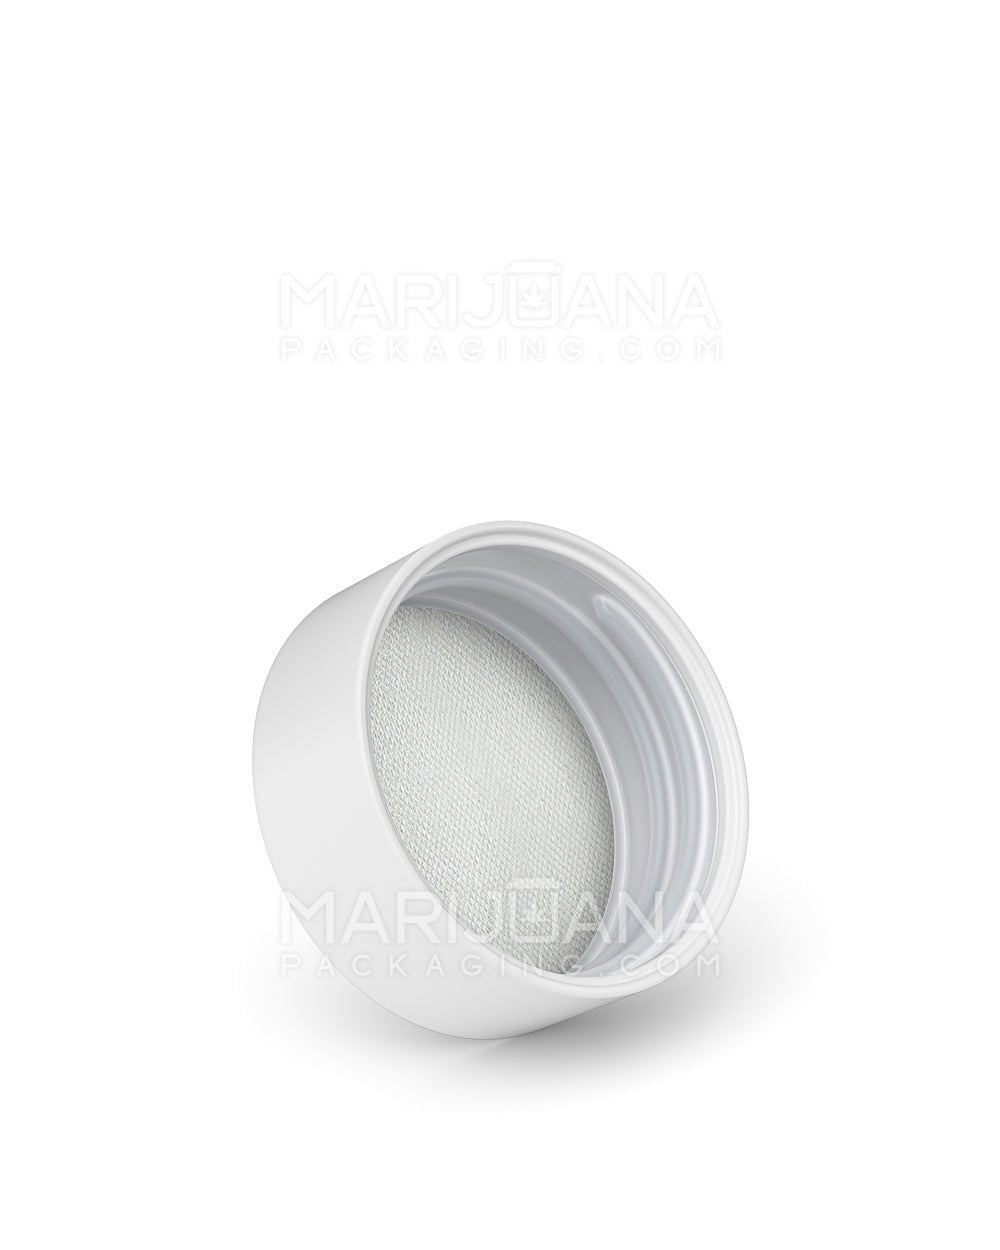 Child Resistant | Smooth Push Down & Turn Plastic Caps w/ Foil & Heat Liner | 38mm - Matte White - 320 Count - 4